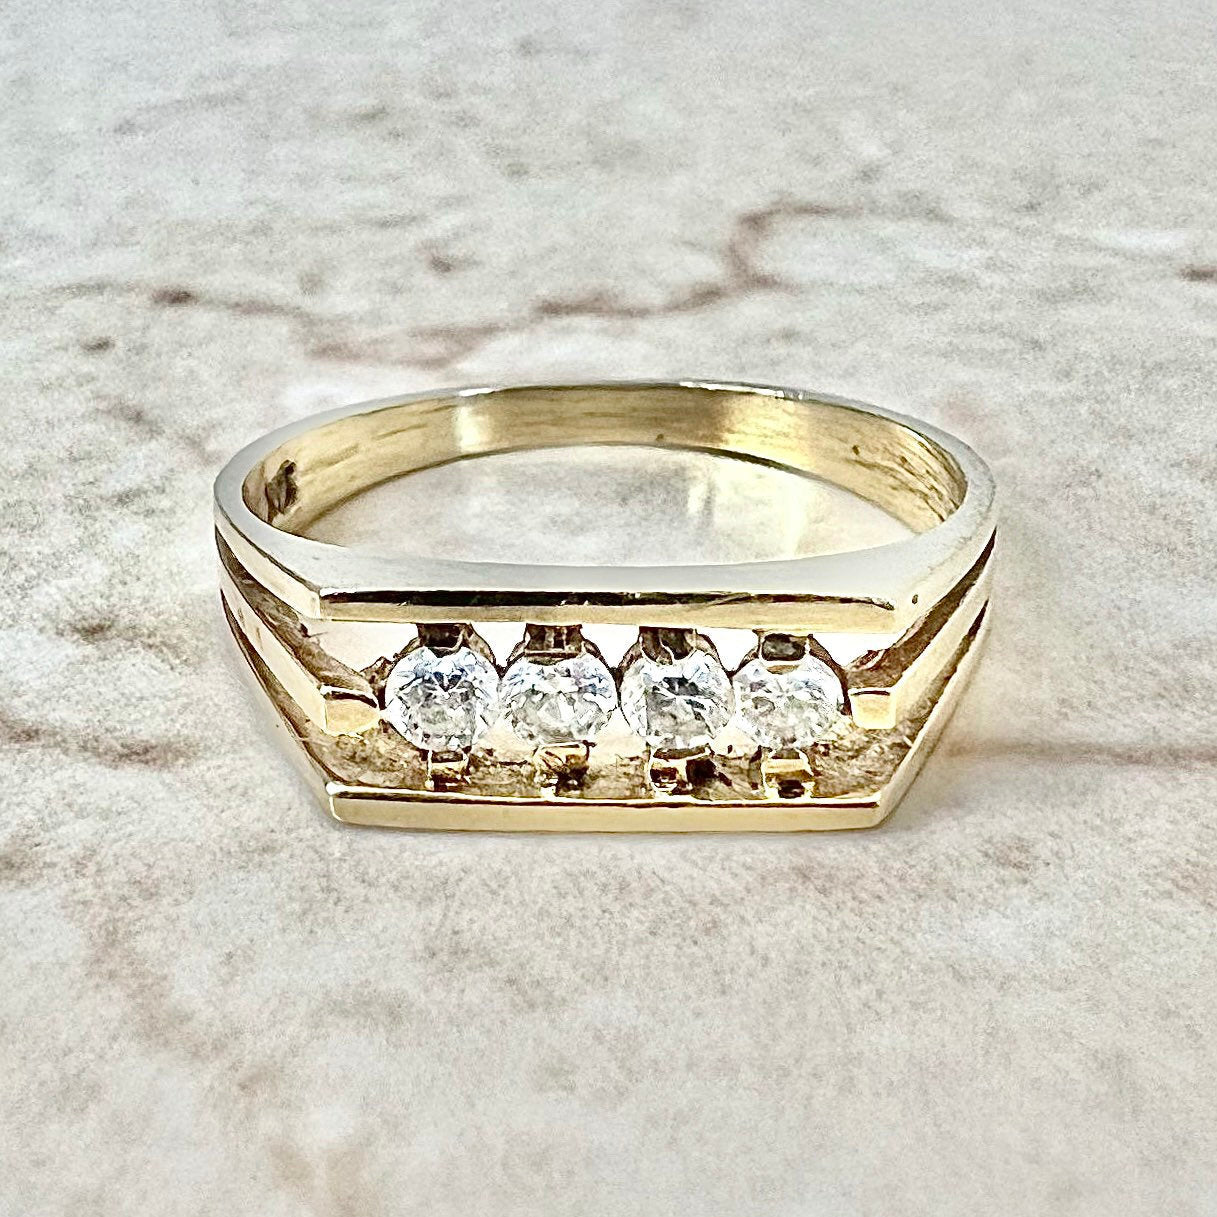 Vintage 14K 4 Stone Diamond Band Ring - Yellow Gold Wedding Ring - Cocktail Ring - Anniversary Ring - Best Gift For Her - Jewelry Sale